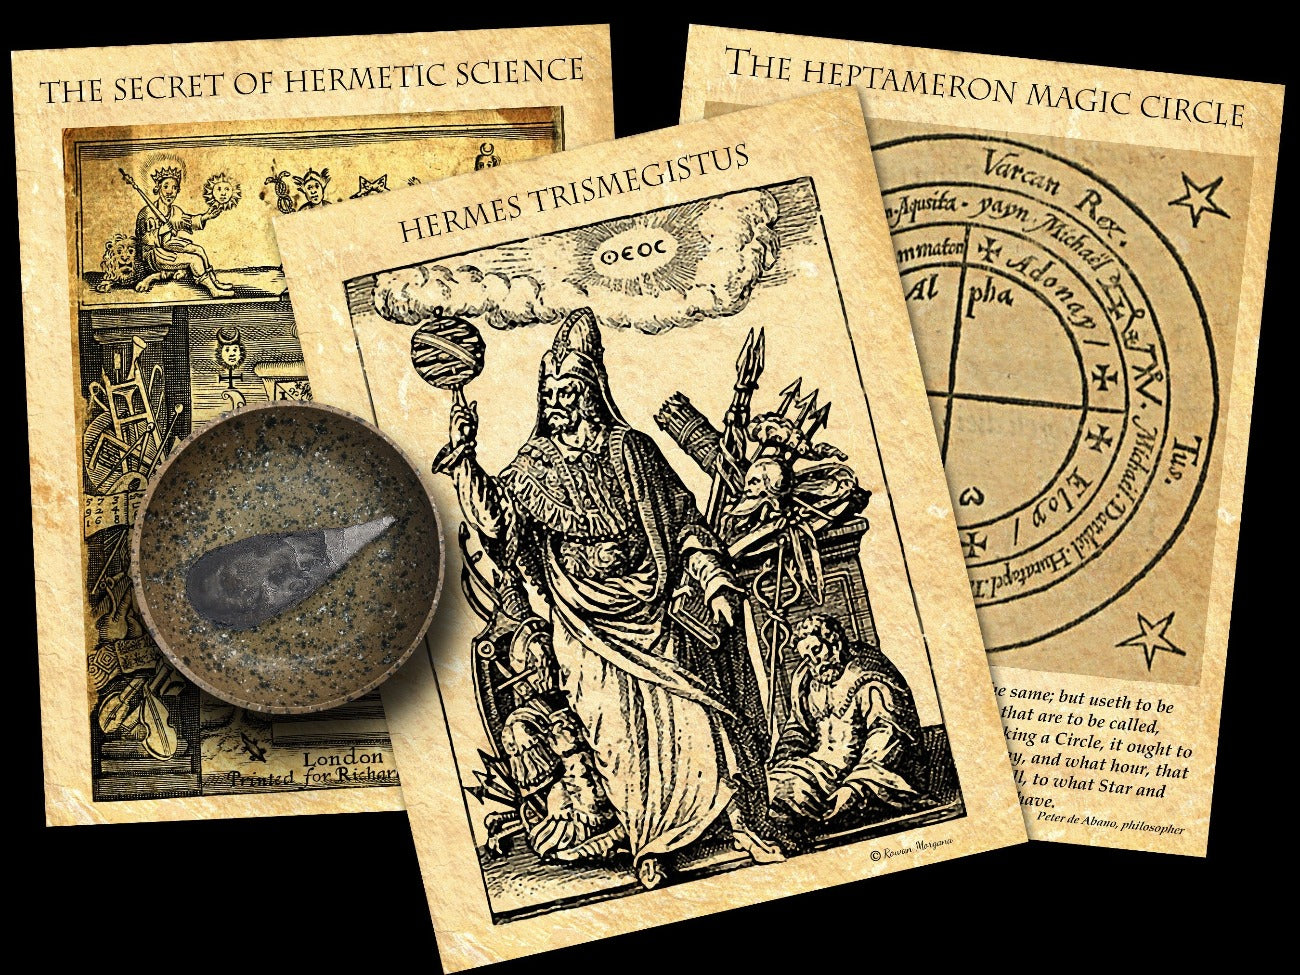 The Secret of Hermetic Youth, The Heptameron Magic Circle, and Hermes Trismegistus pages.